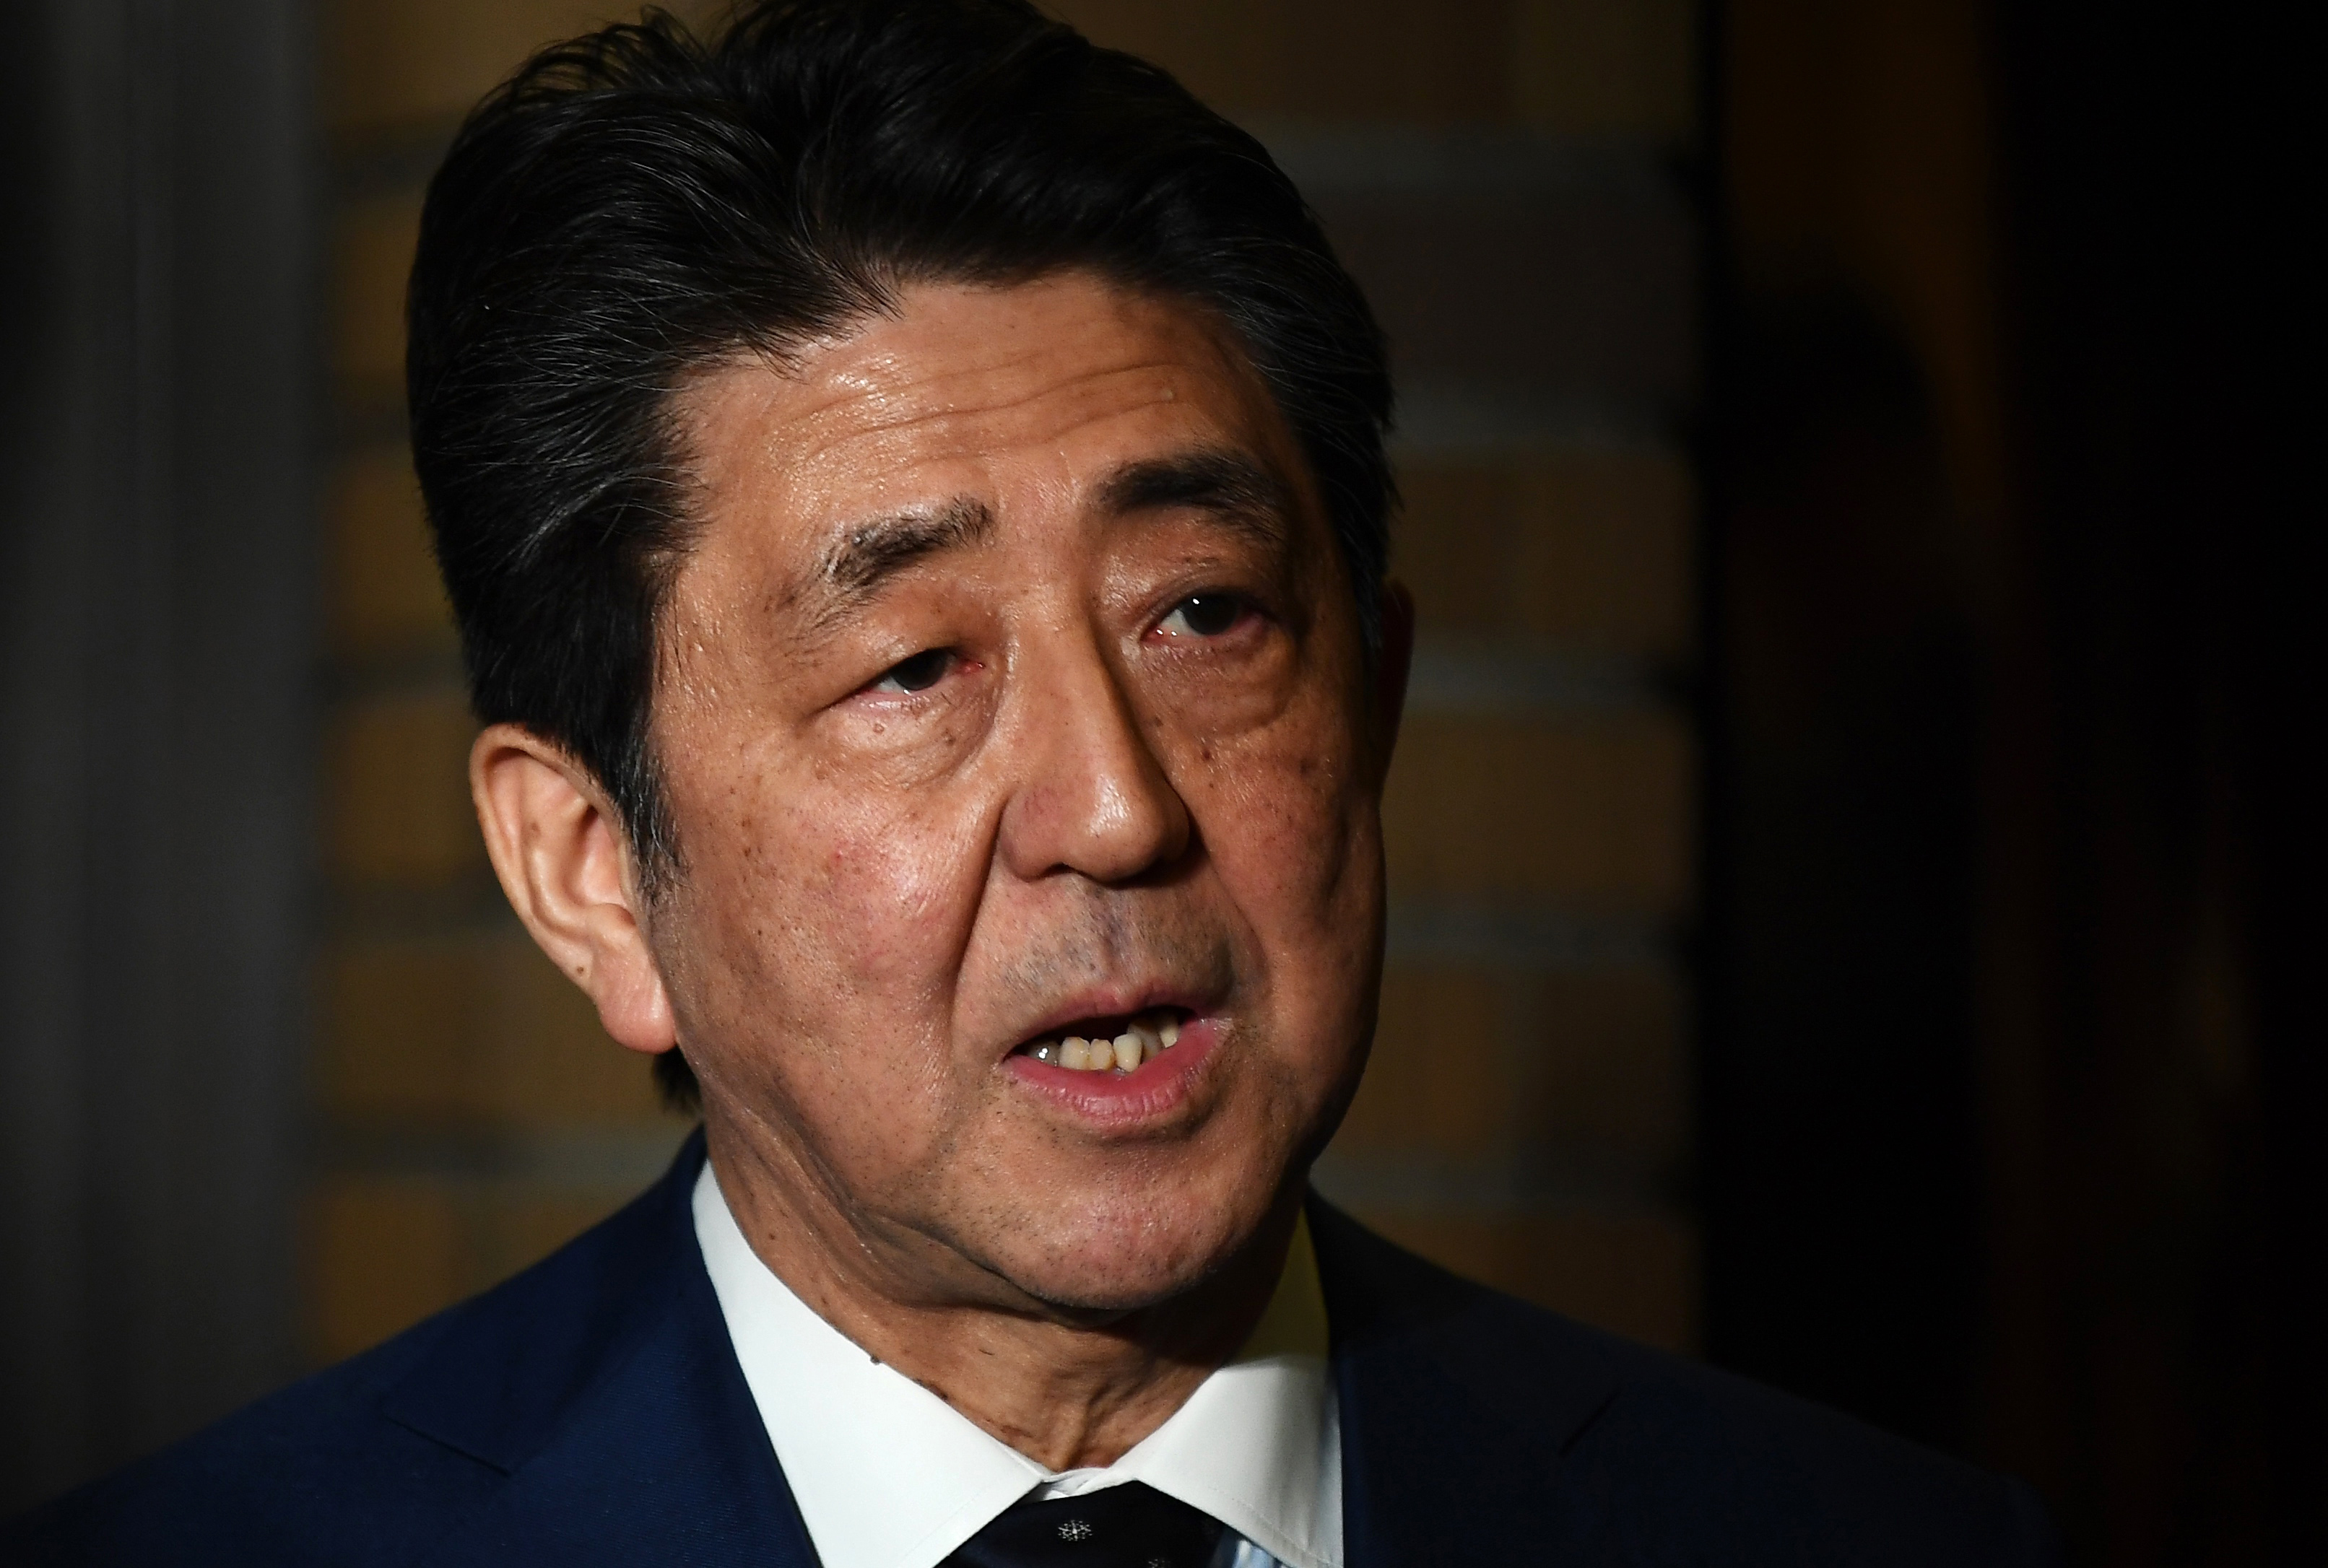 Japanese Prime Minister Shinzo Abe speaks to the press in Tokyo on Tuesday, March 24.